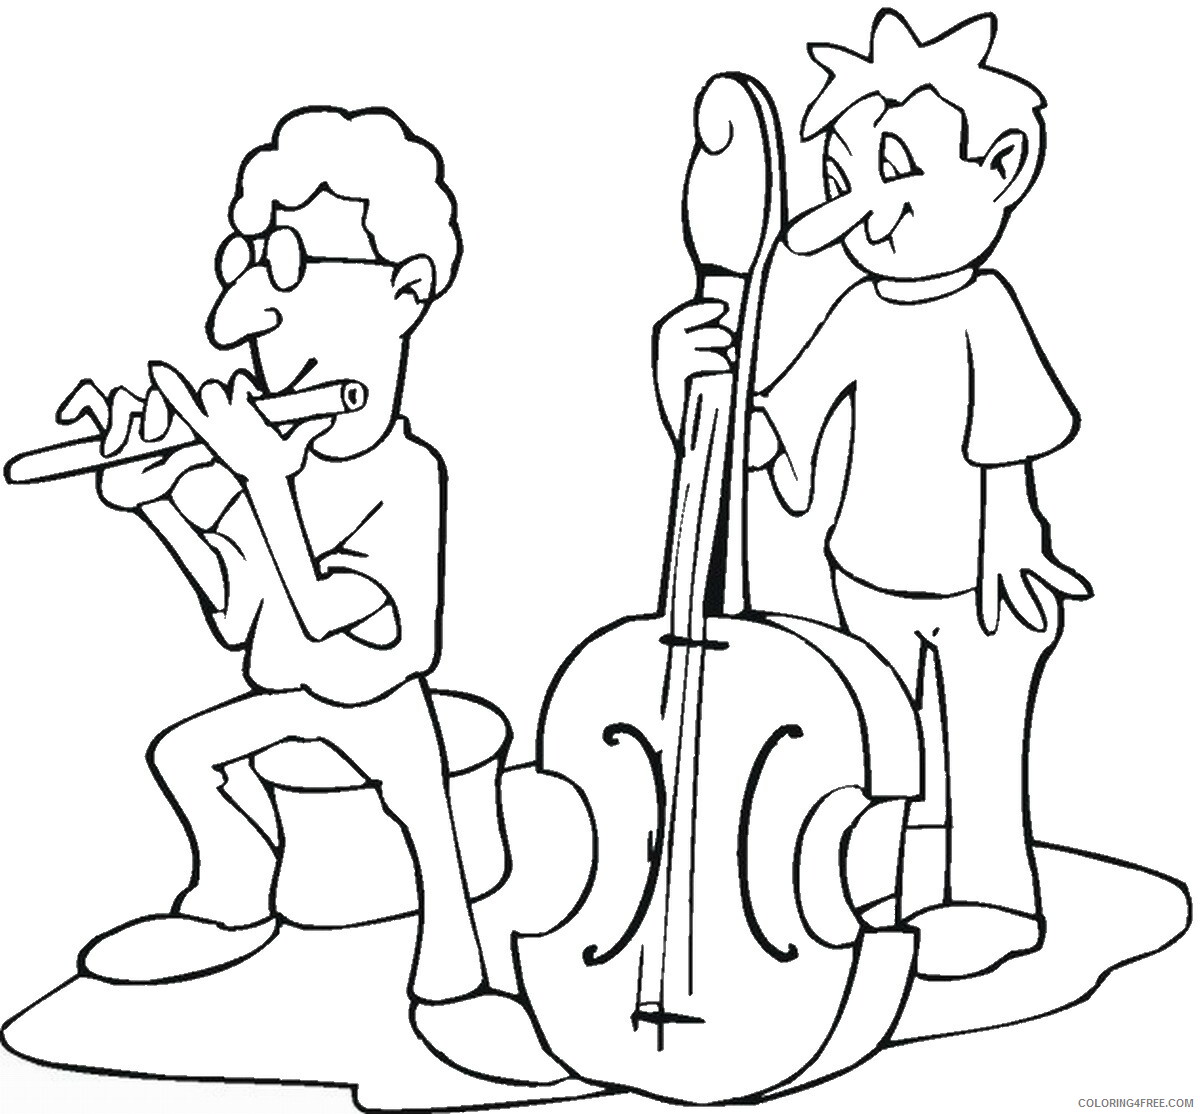 Music Coloring Pages music_04 Printable 2021 4316 Coloring4free